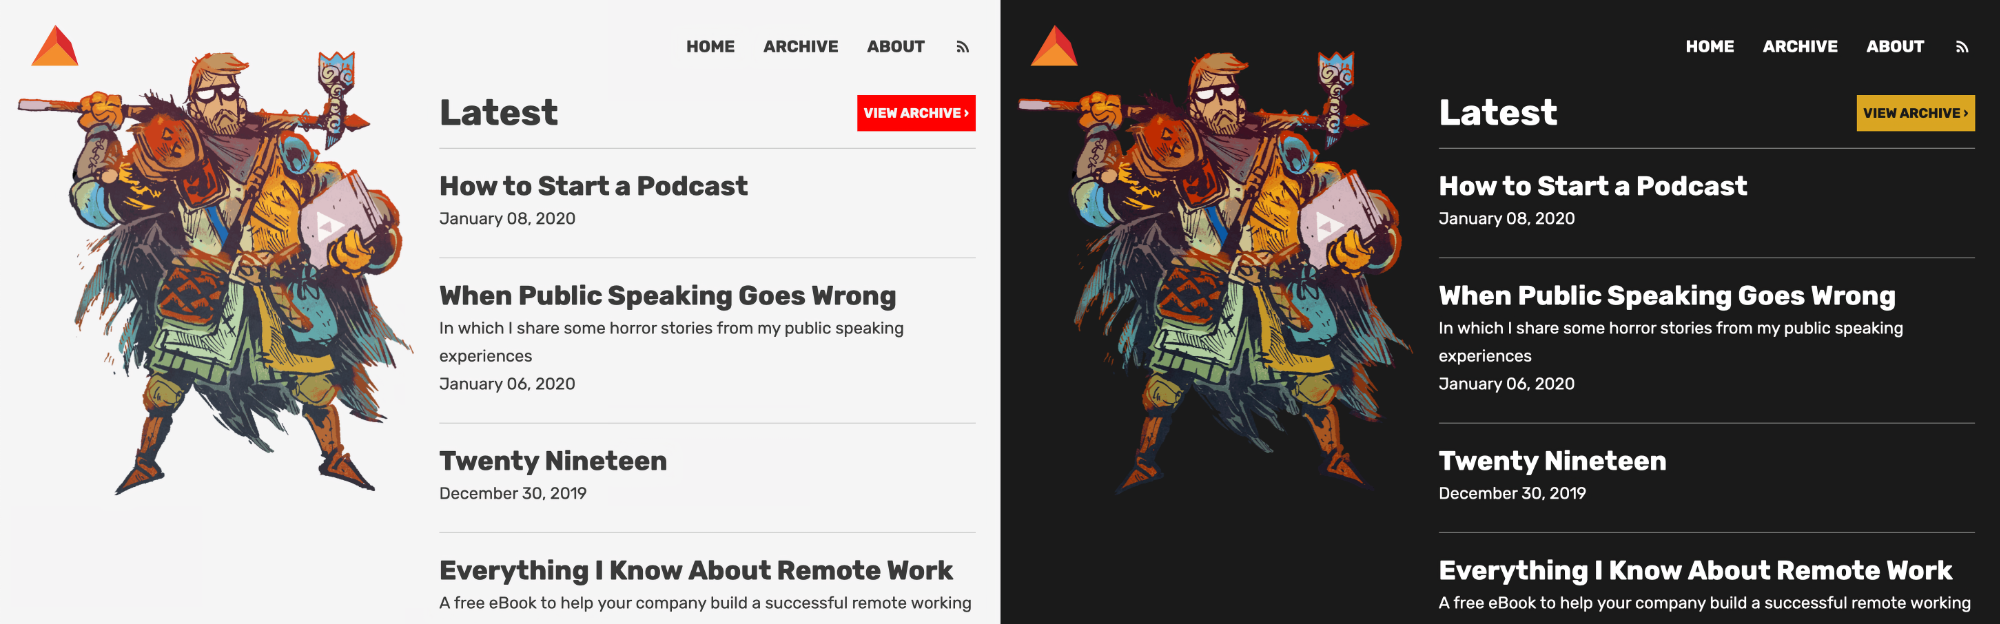 A side-by-side comparison of light and dark themes for the home page daverupert.com. The navigation, text, background, and link colors update, but the logo and illustration of Dave as a fantasy warrior remain the same.